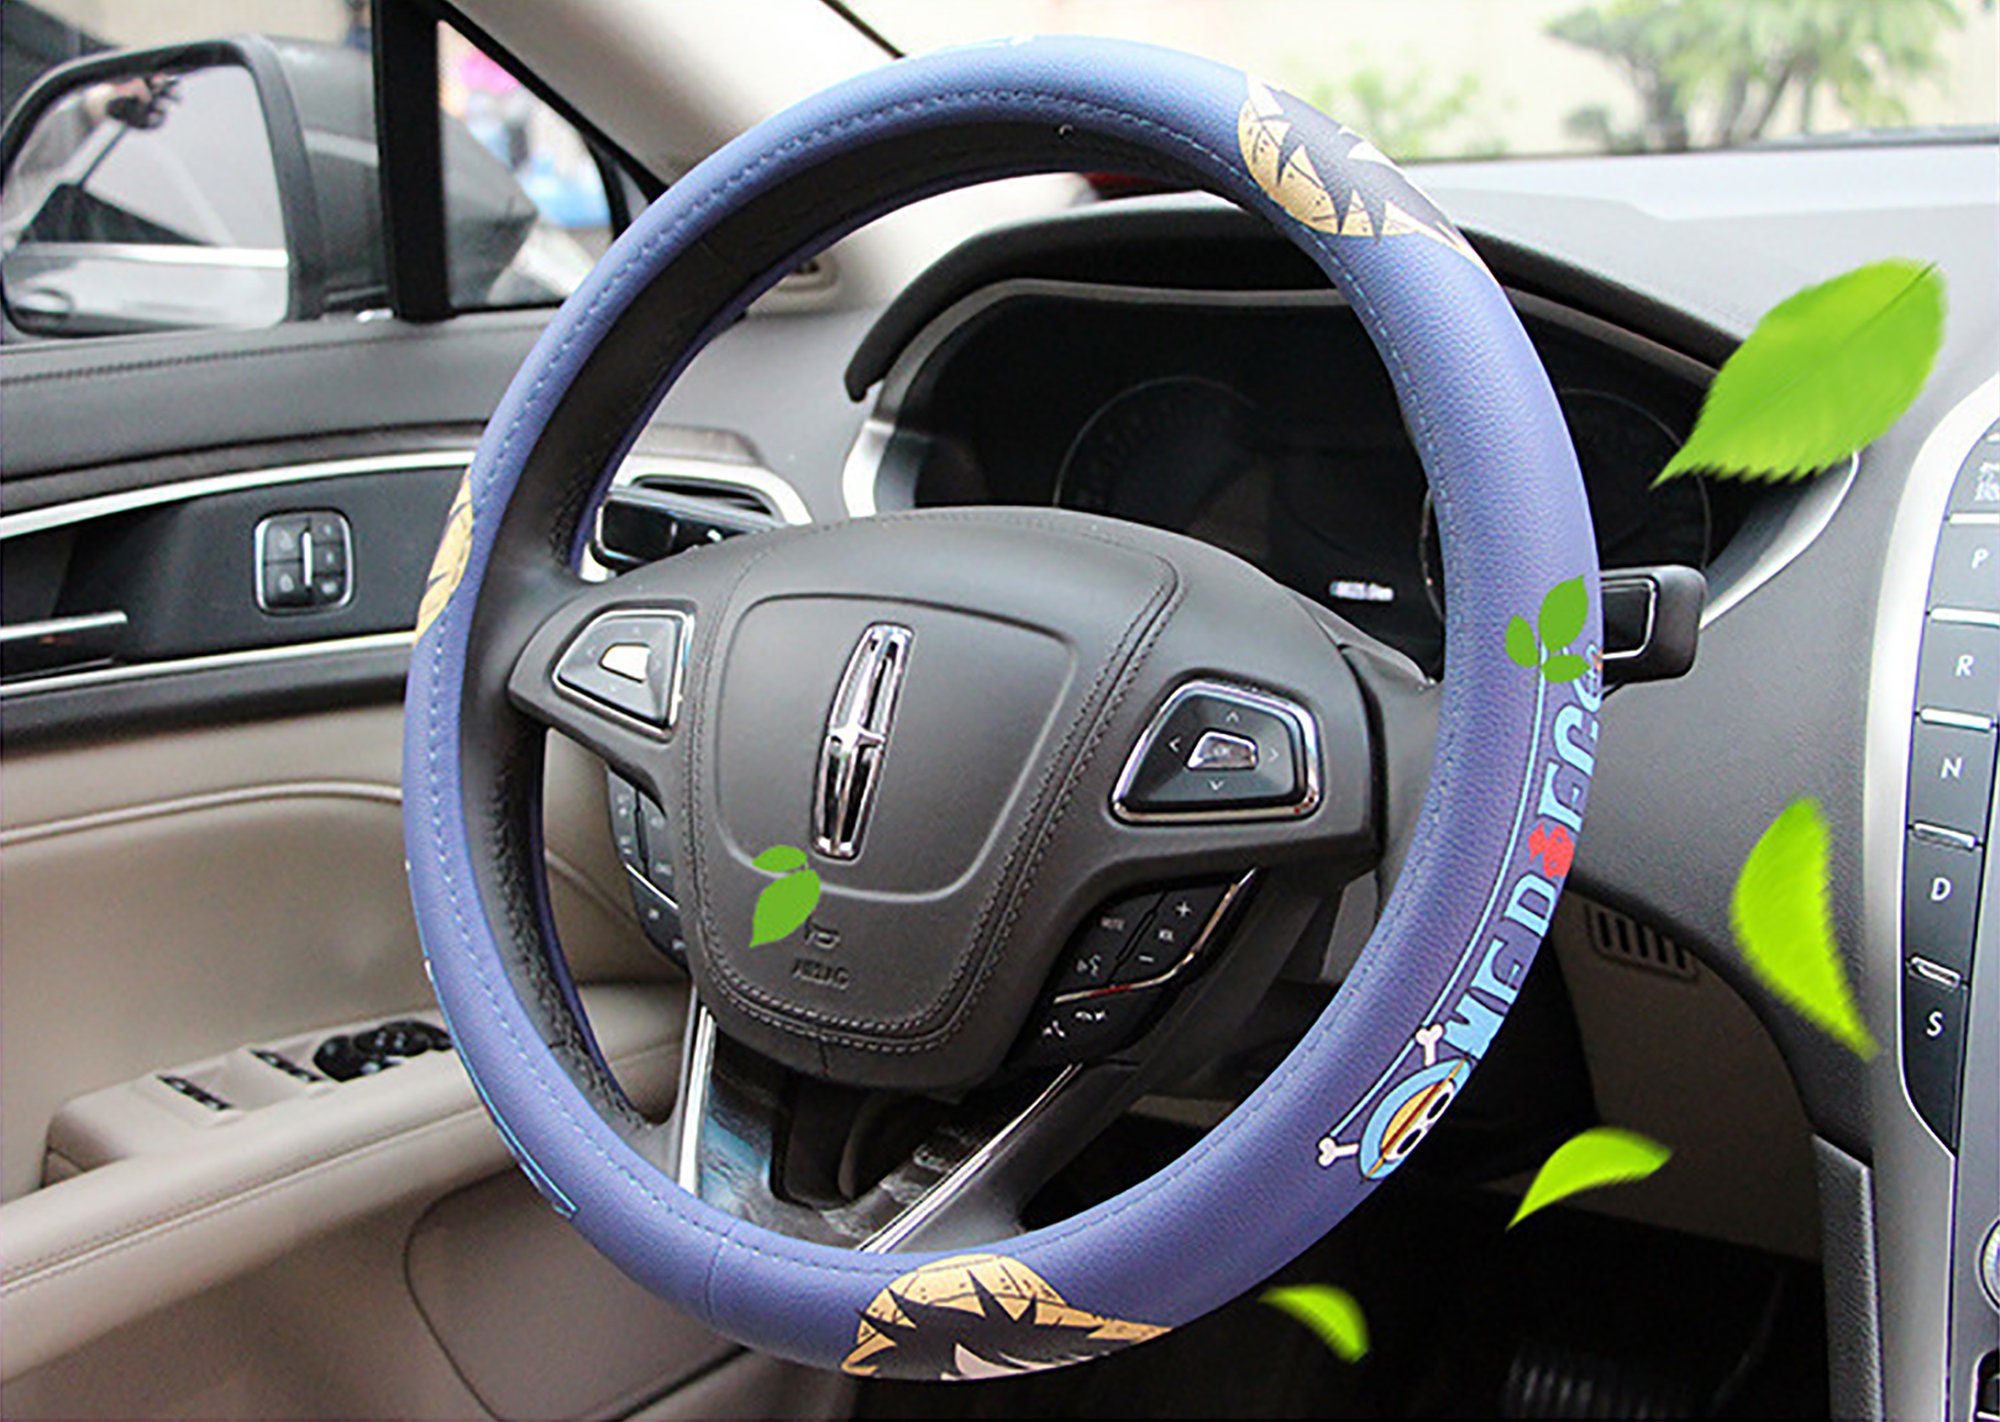 Steering wheel cover,Luffy straw hat,leather